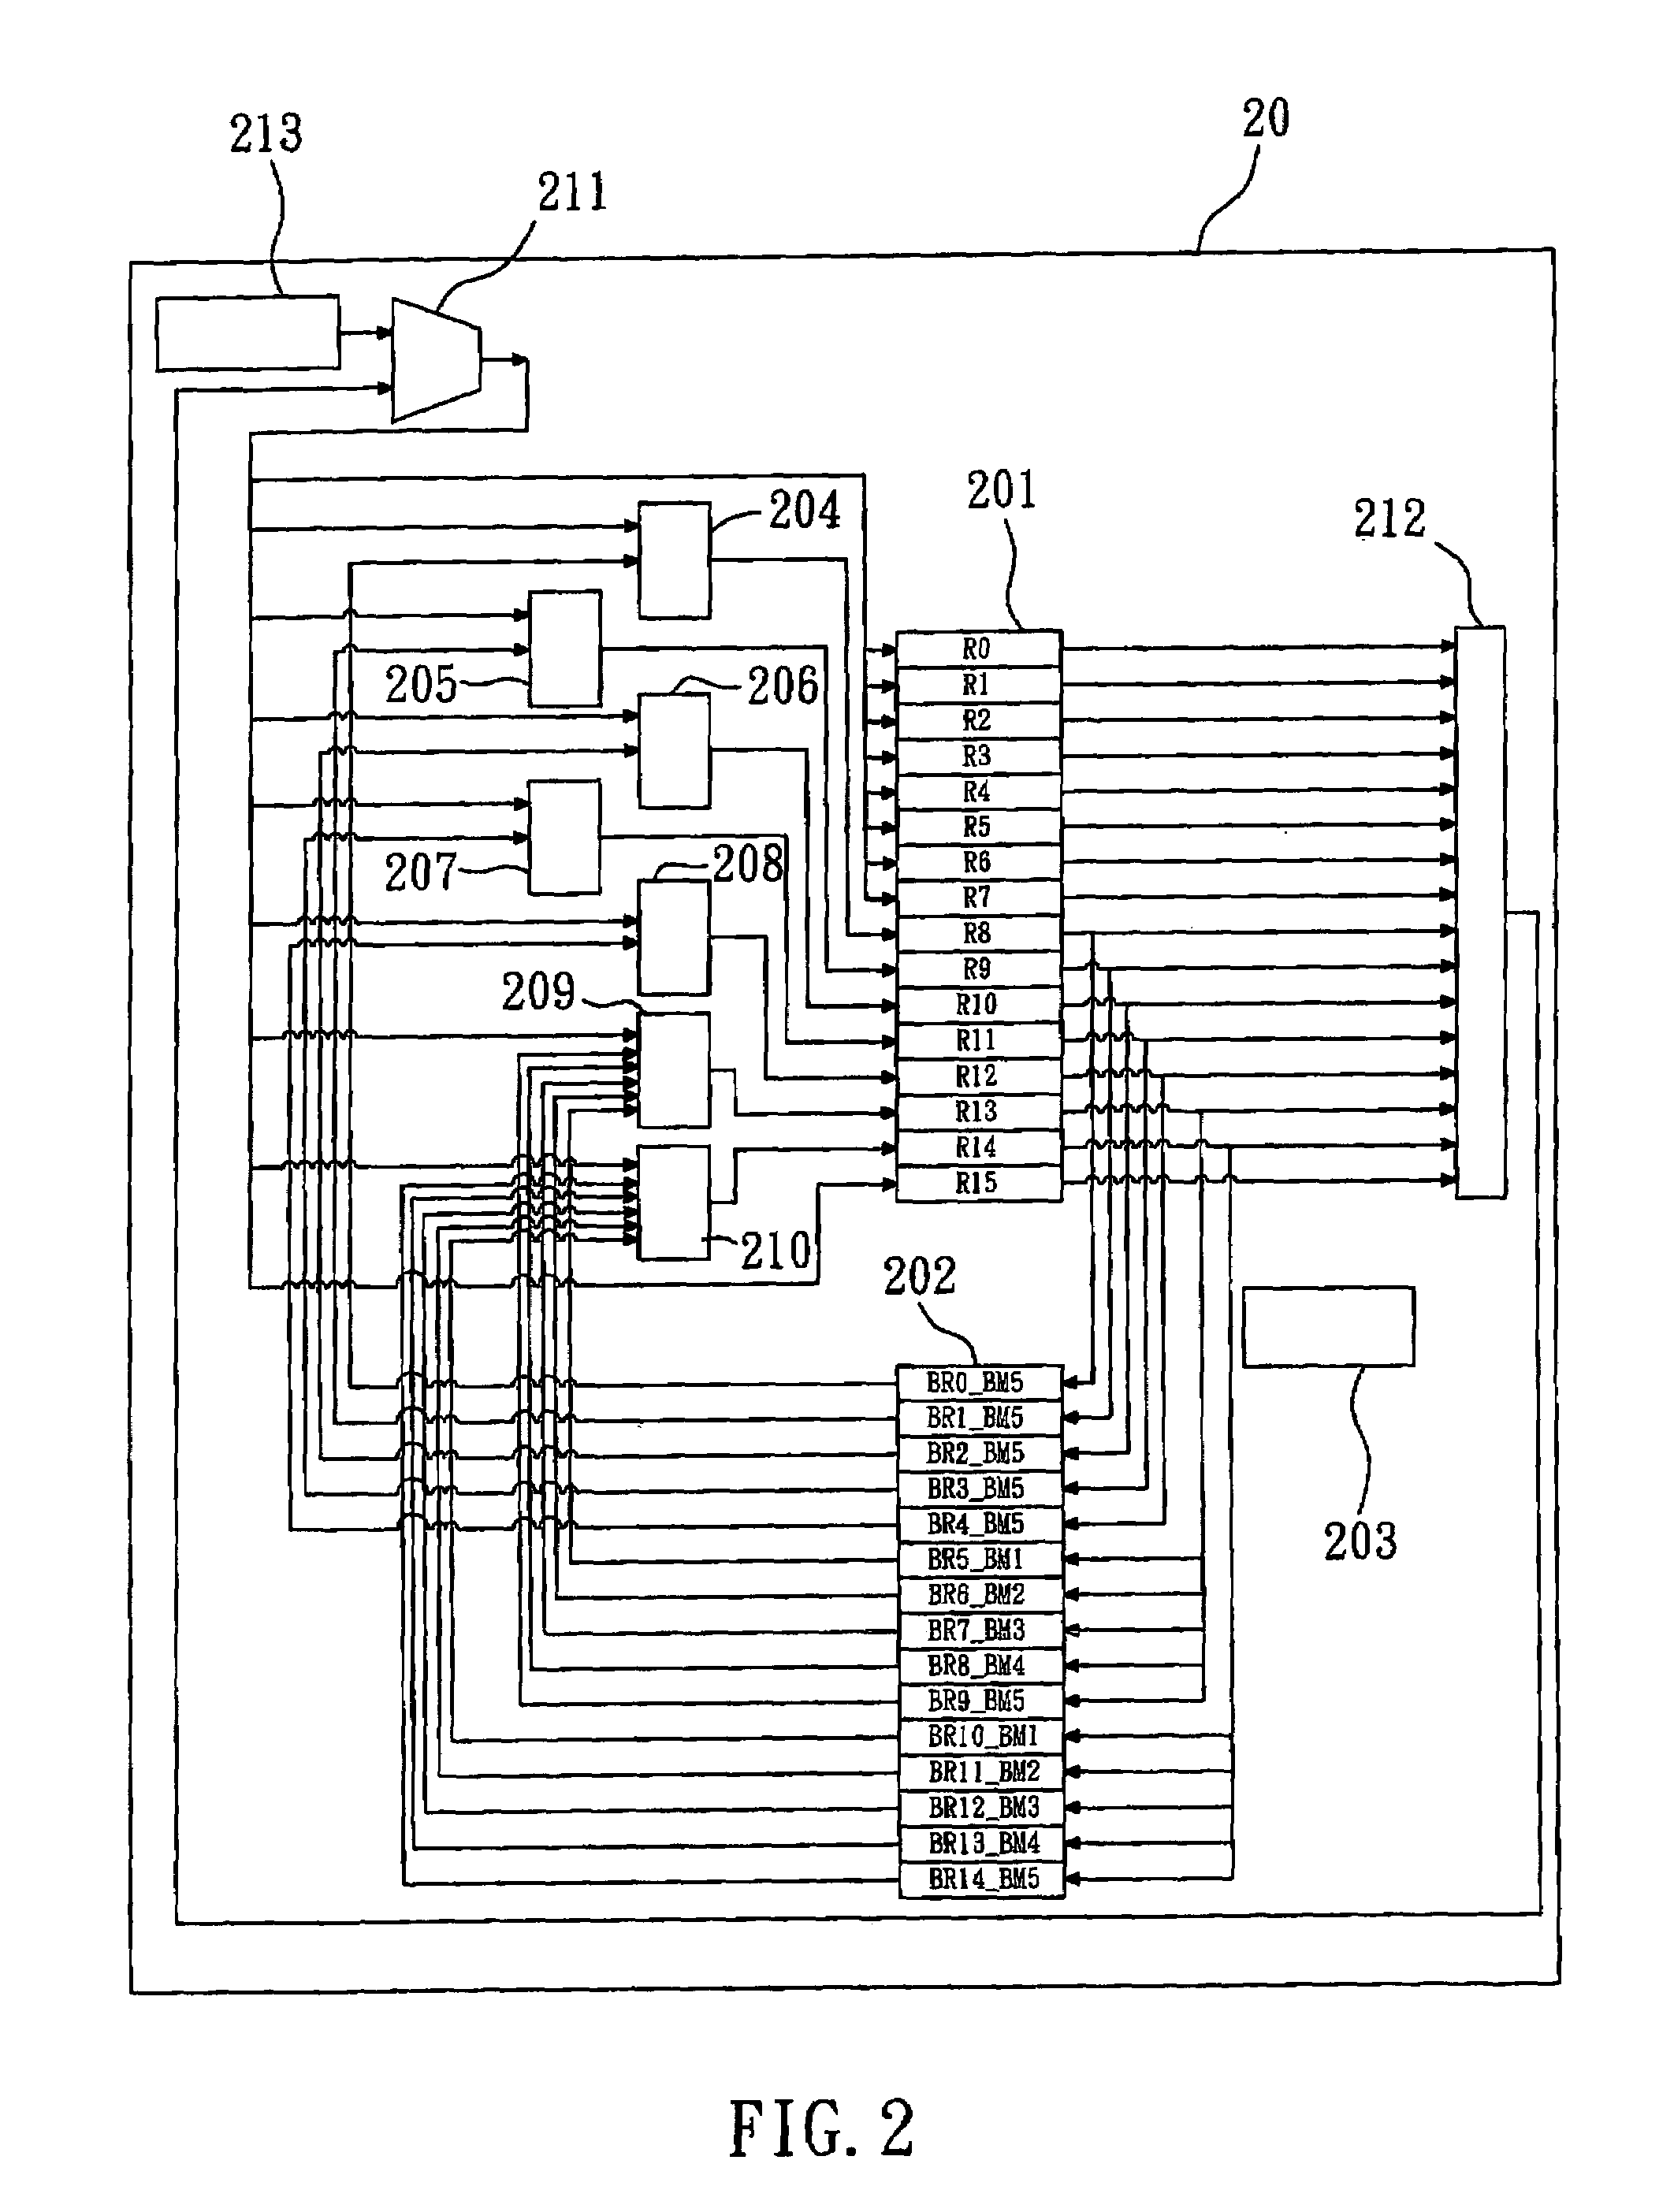 Automatic register backup/restore system and method